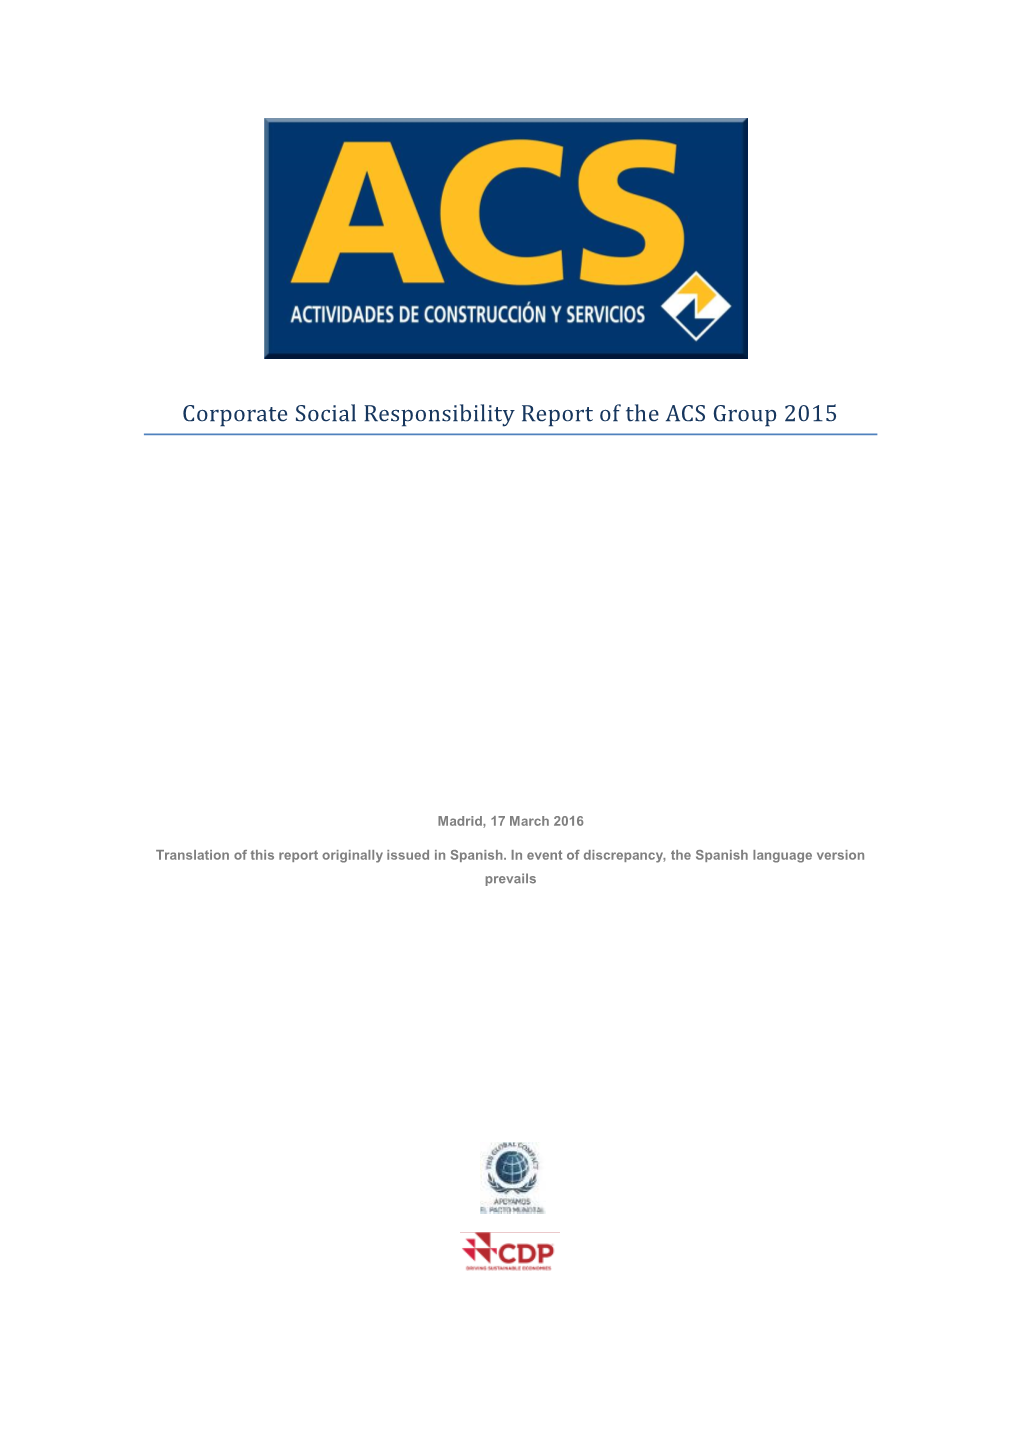 Corporate Social Responsibility Report of the ACS Group 2015